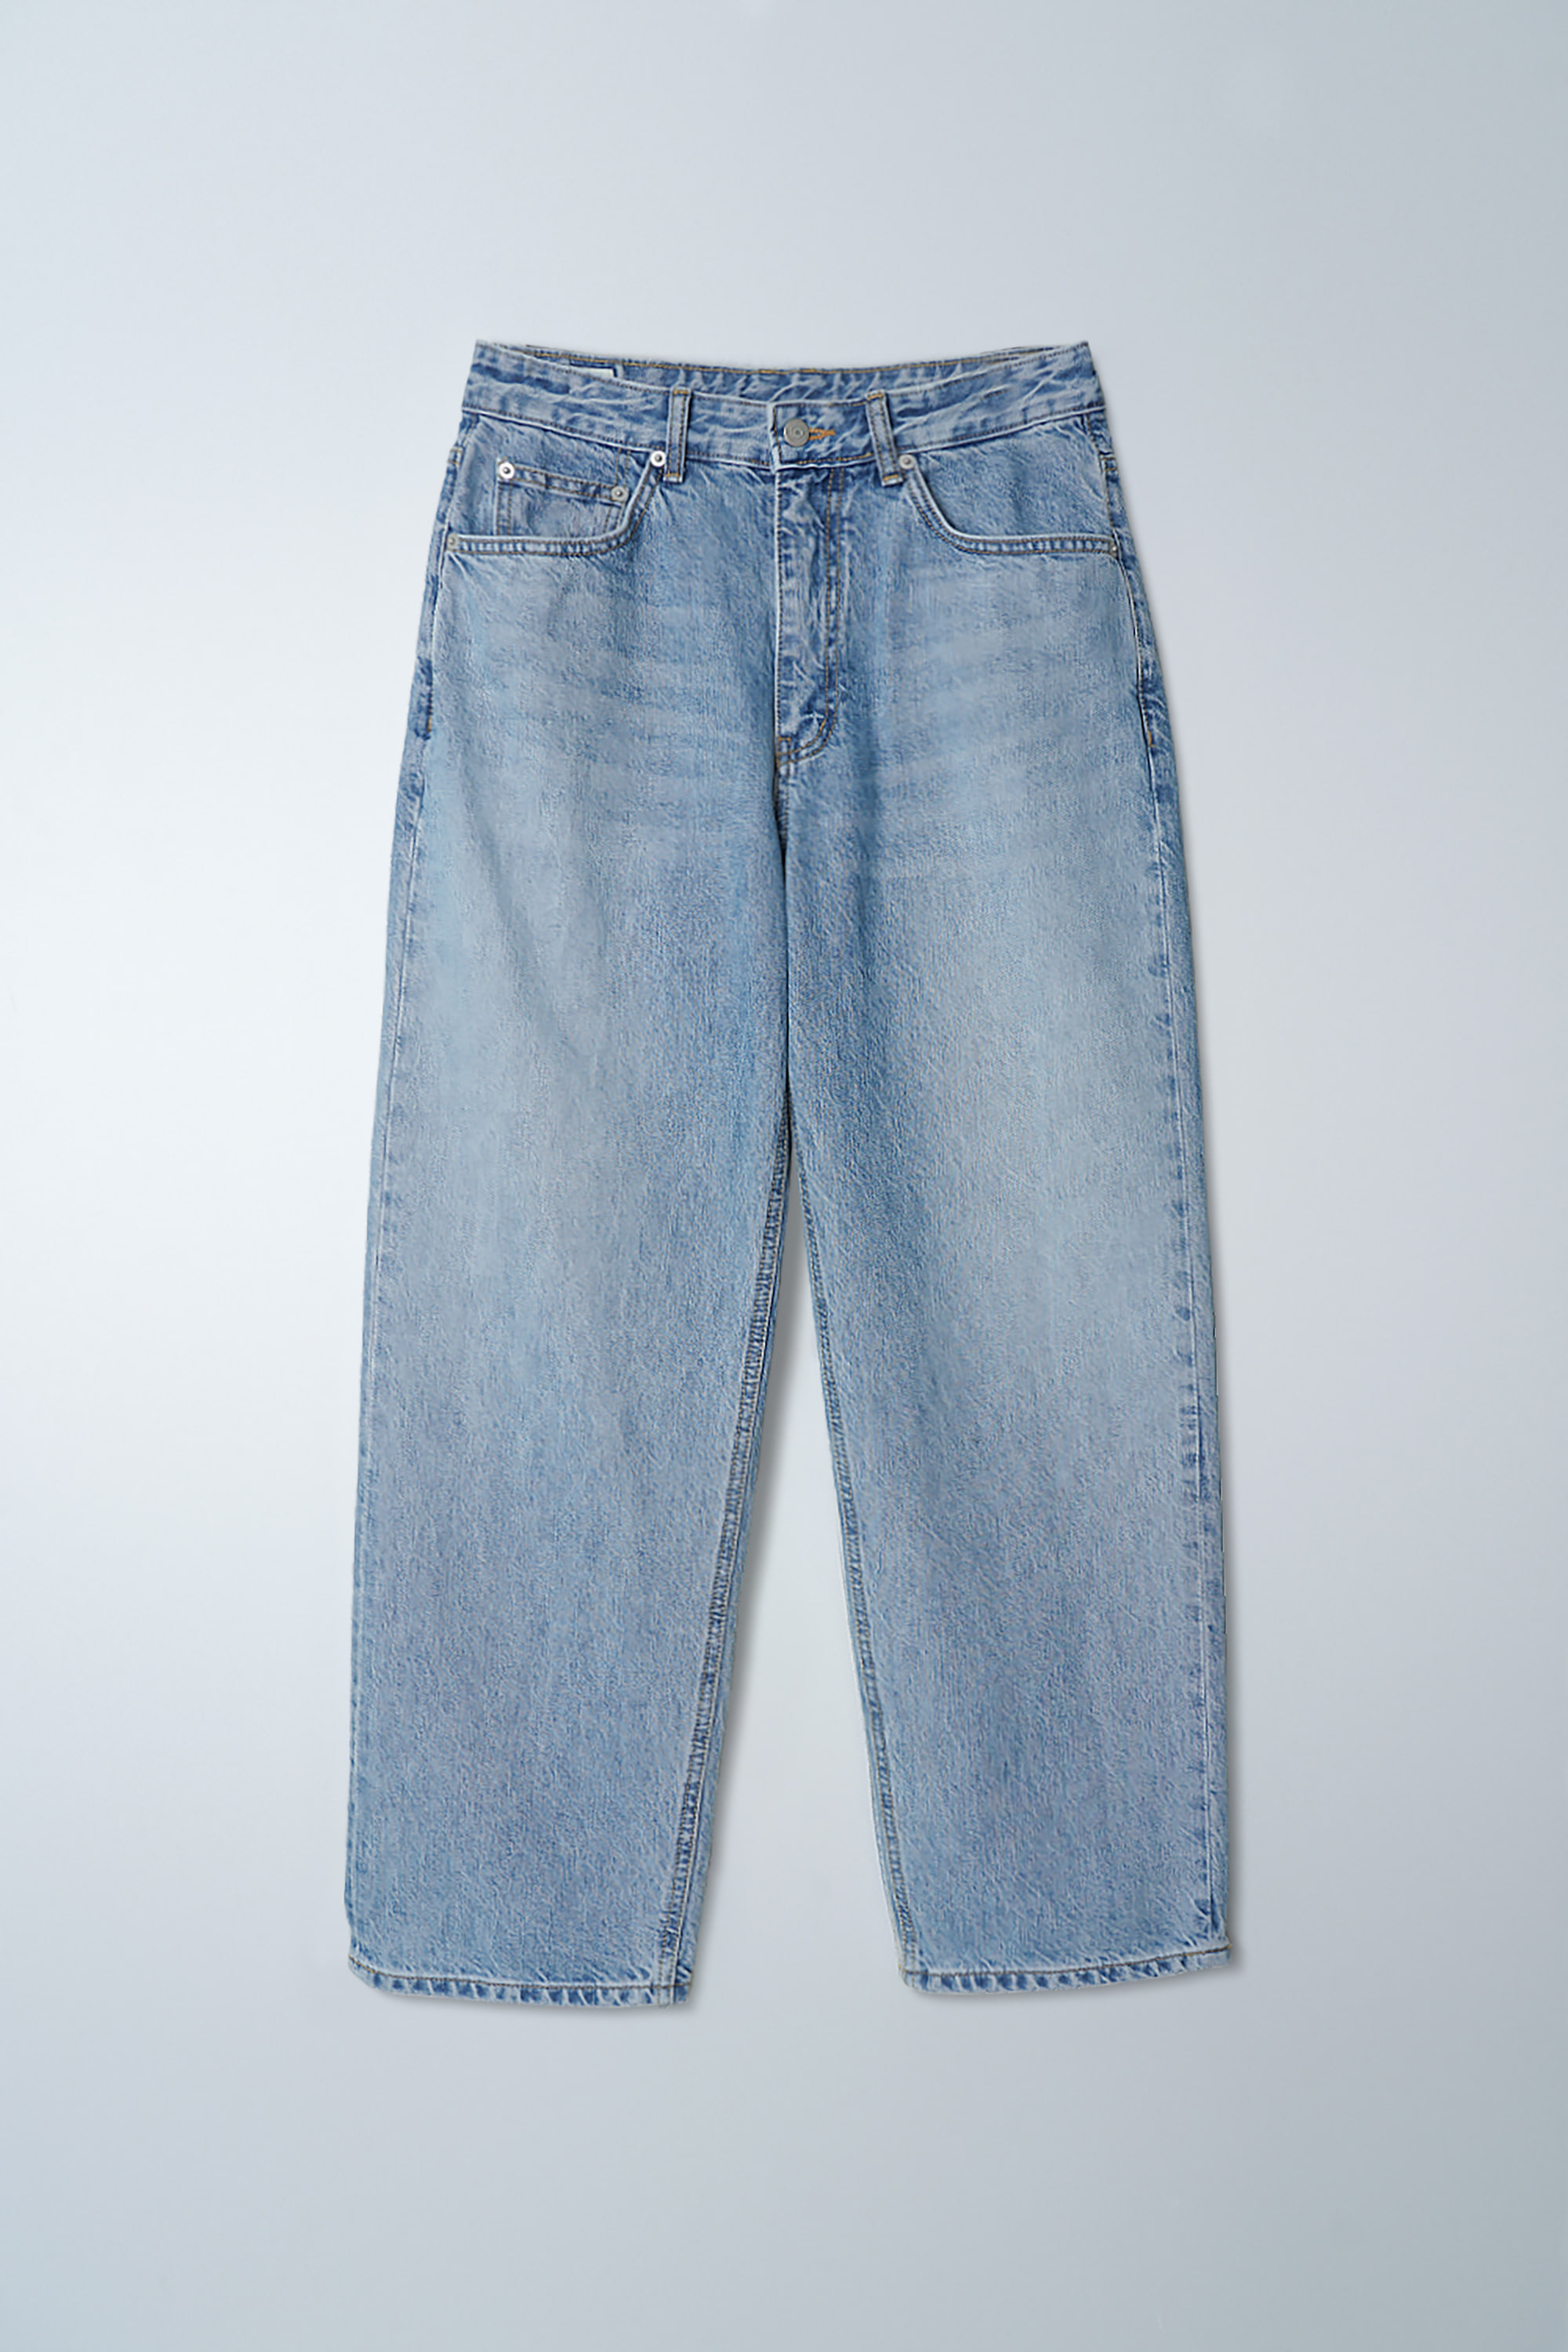 2ND] 5PK WIDE TAPERED DENIM PANTS - LIGHT BLUE - INTHERAW